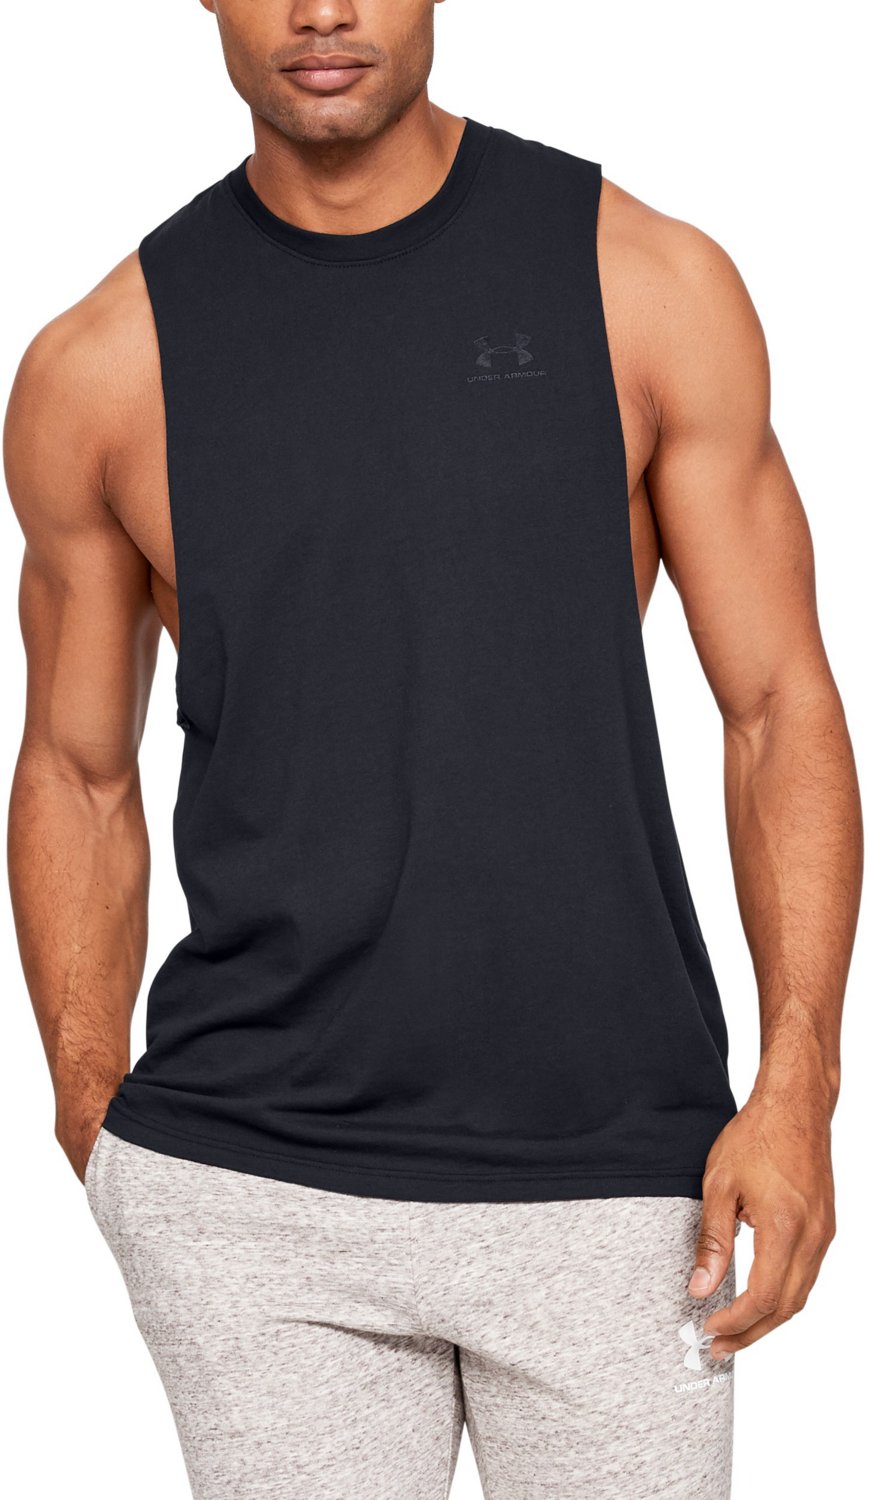 Under Armour Men's Sportstyle Left Chest Cut-off Sleeveless Top